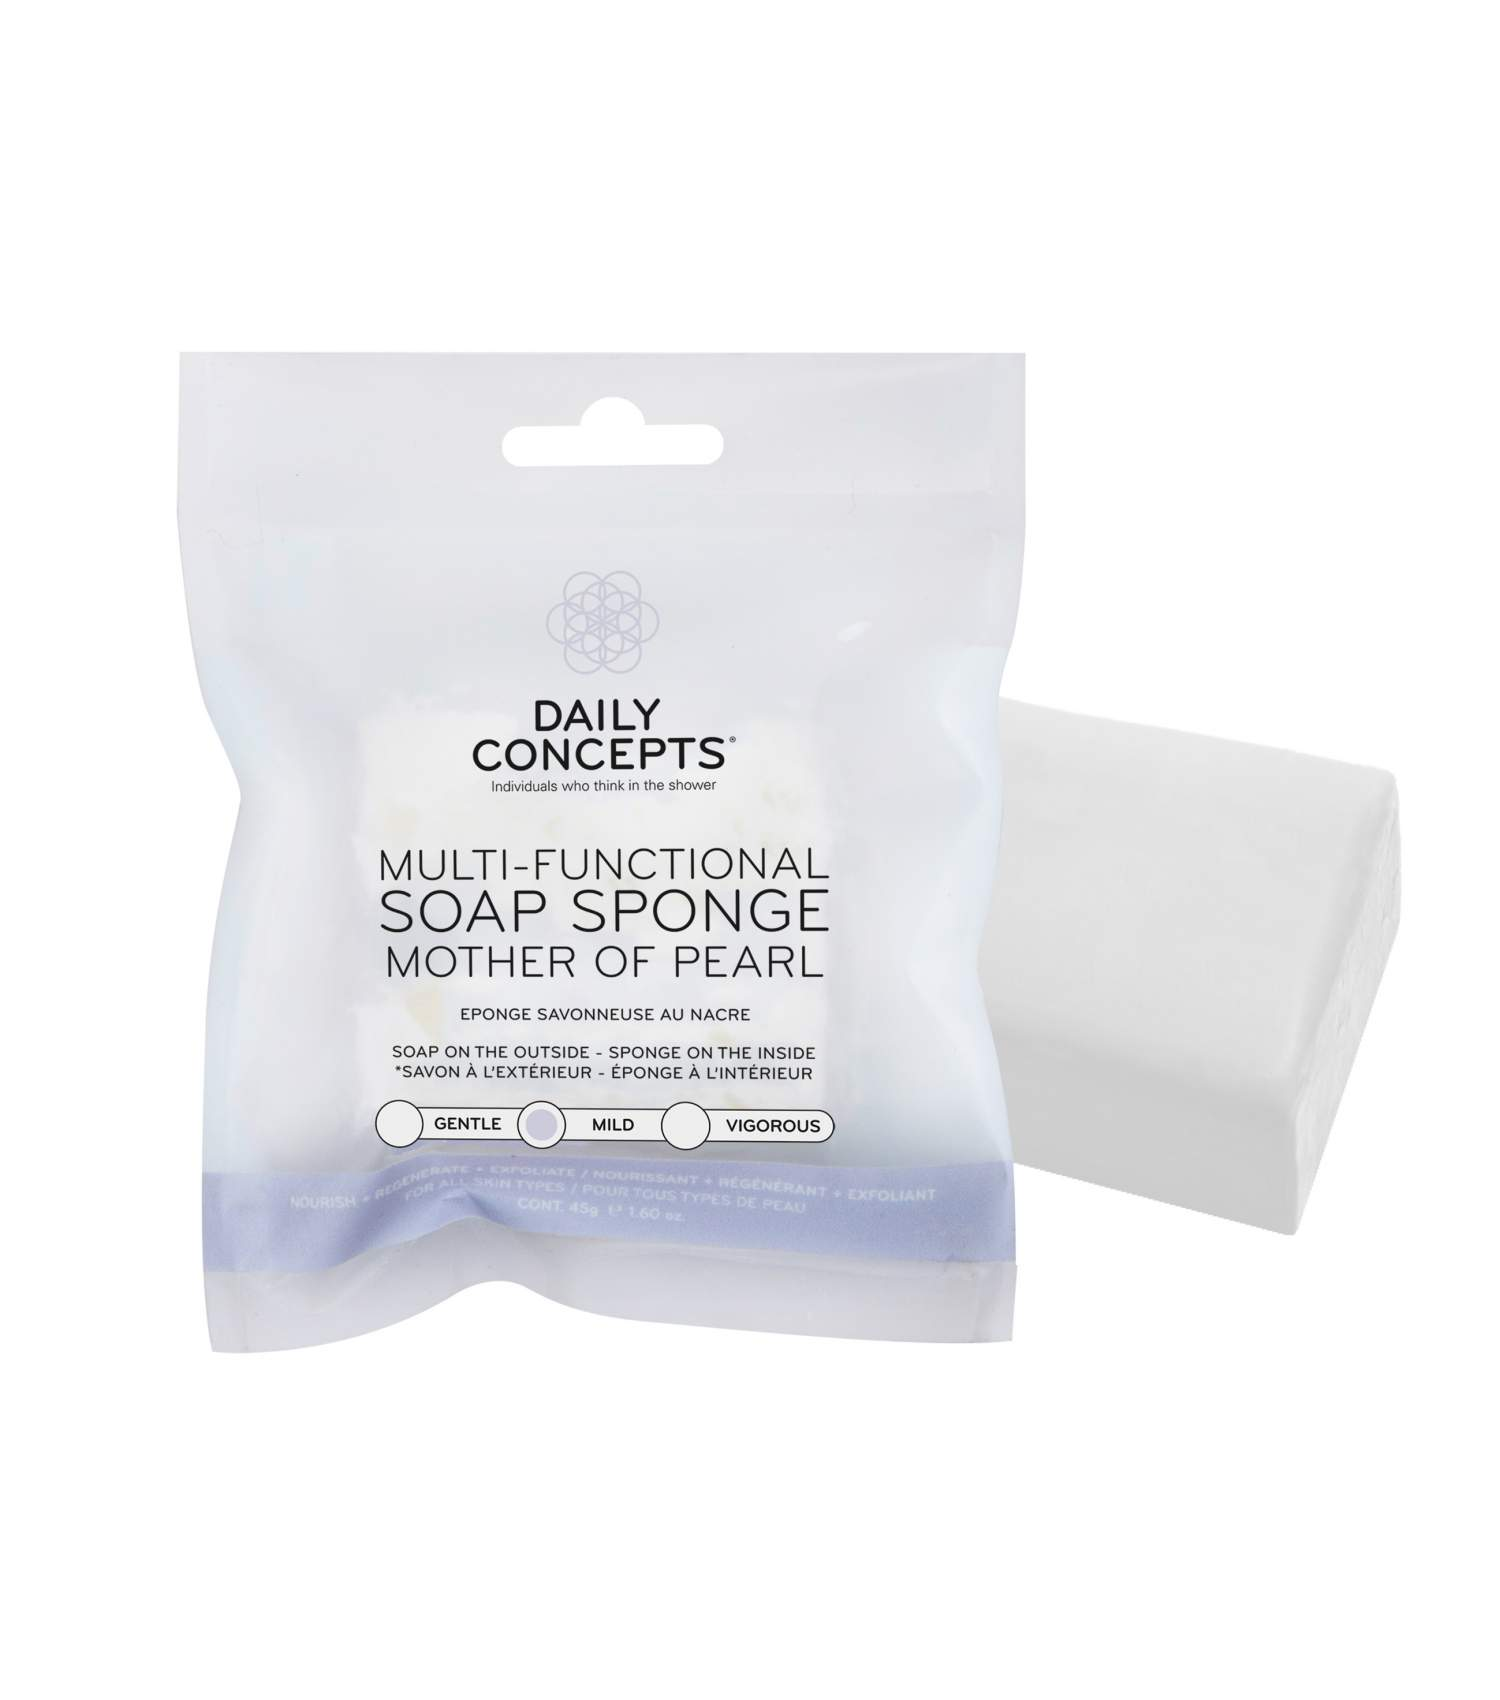 Daily Concepts Mother of Pearl Soap Sponge Daily Concepts Mother of Pearl Soap Sponge 1